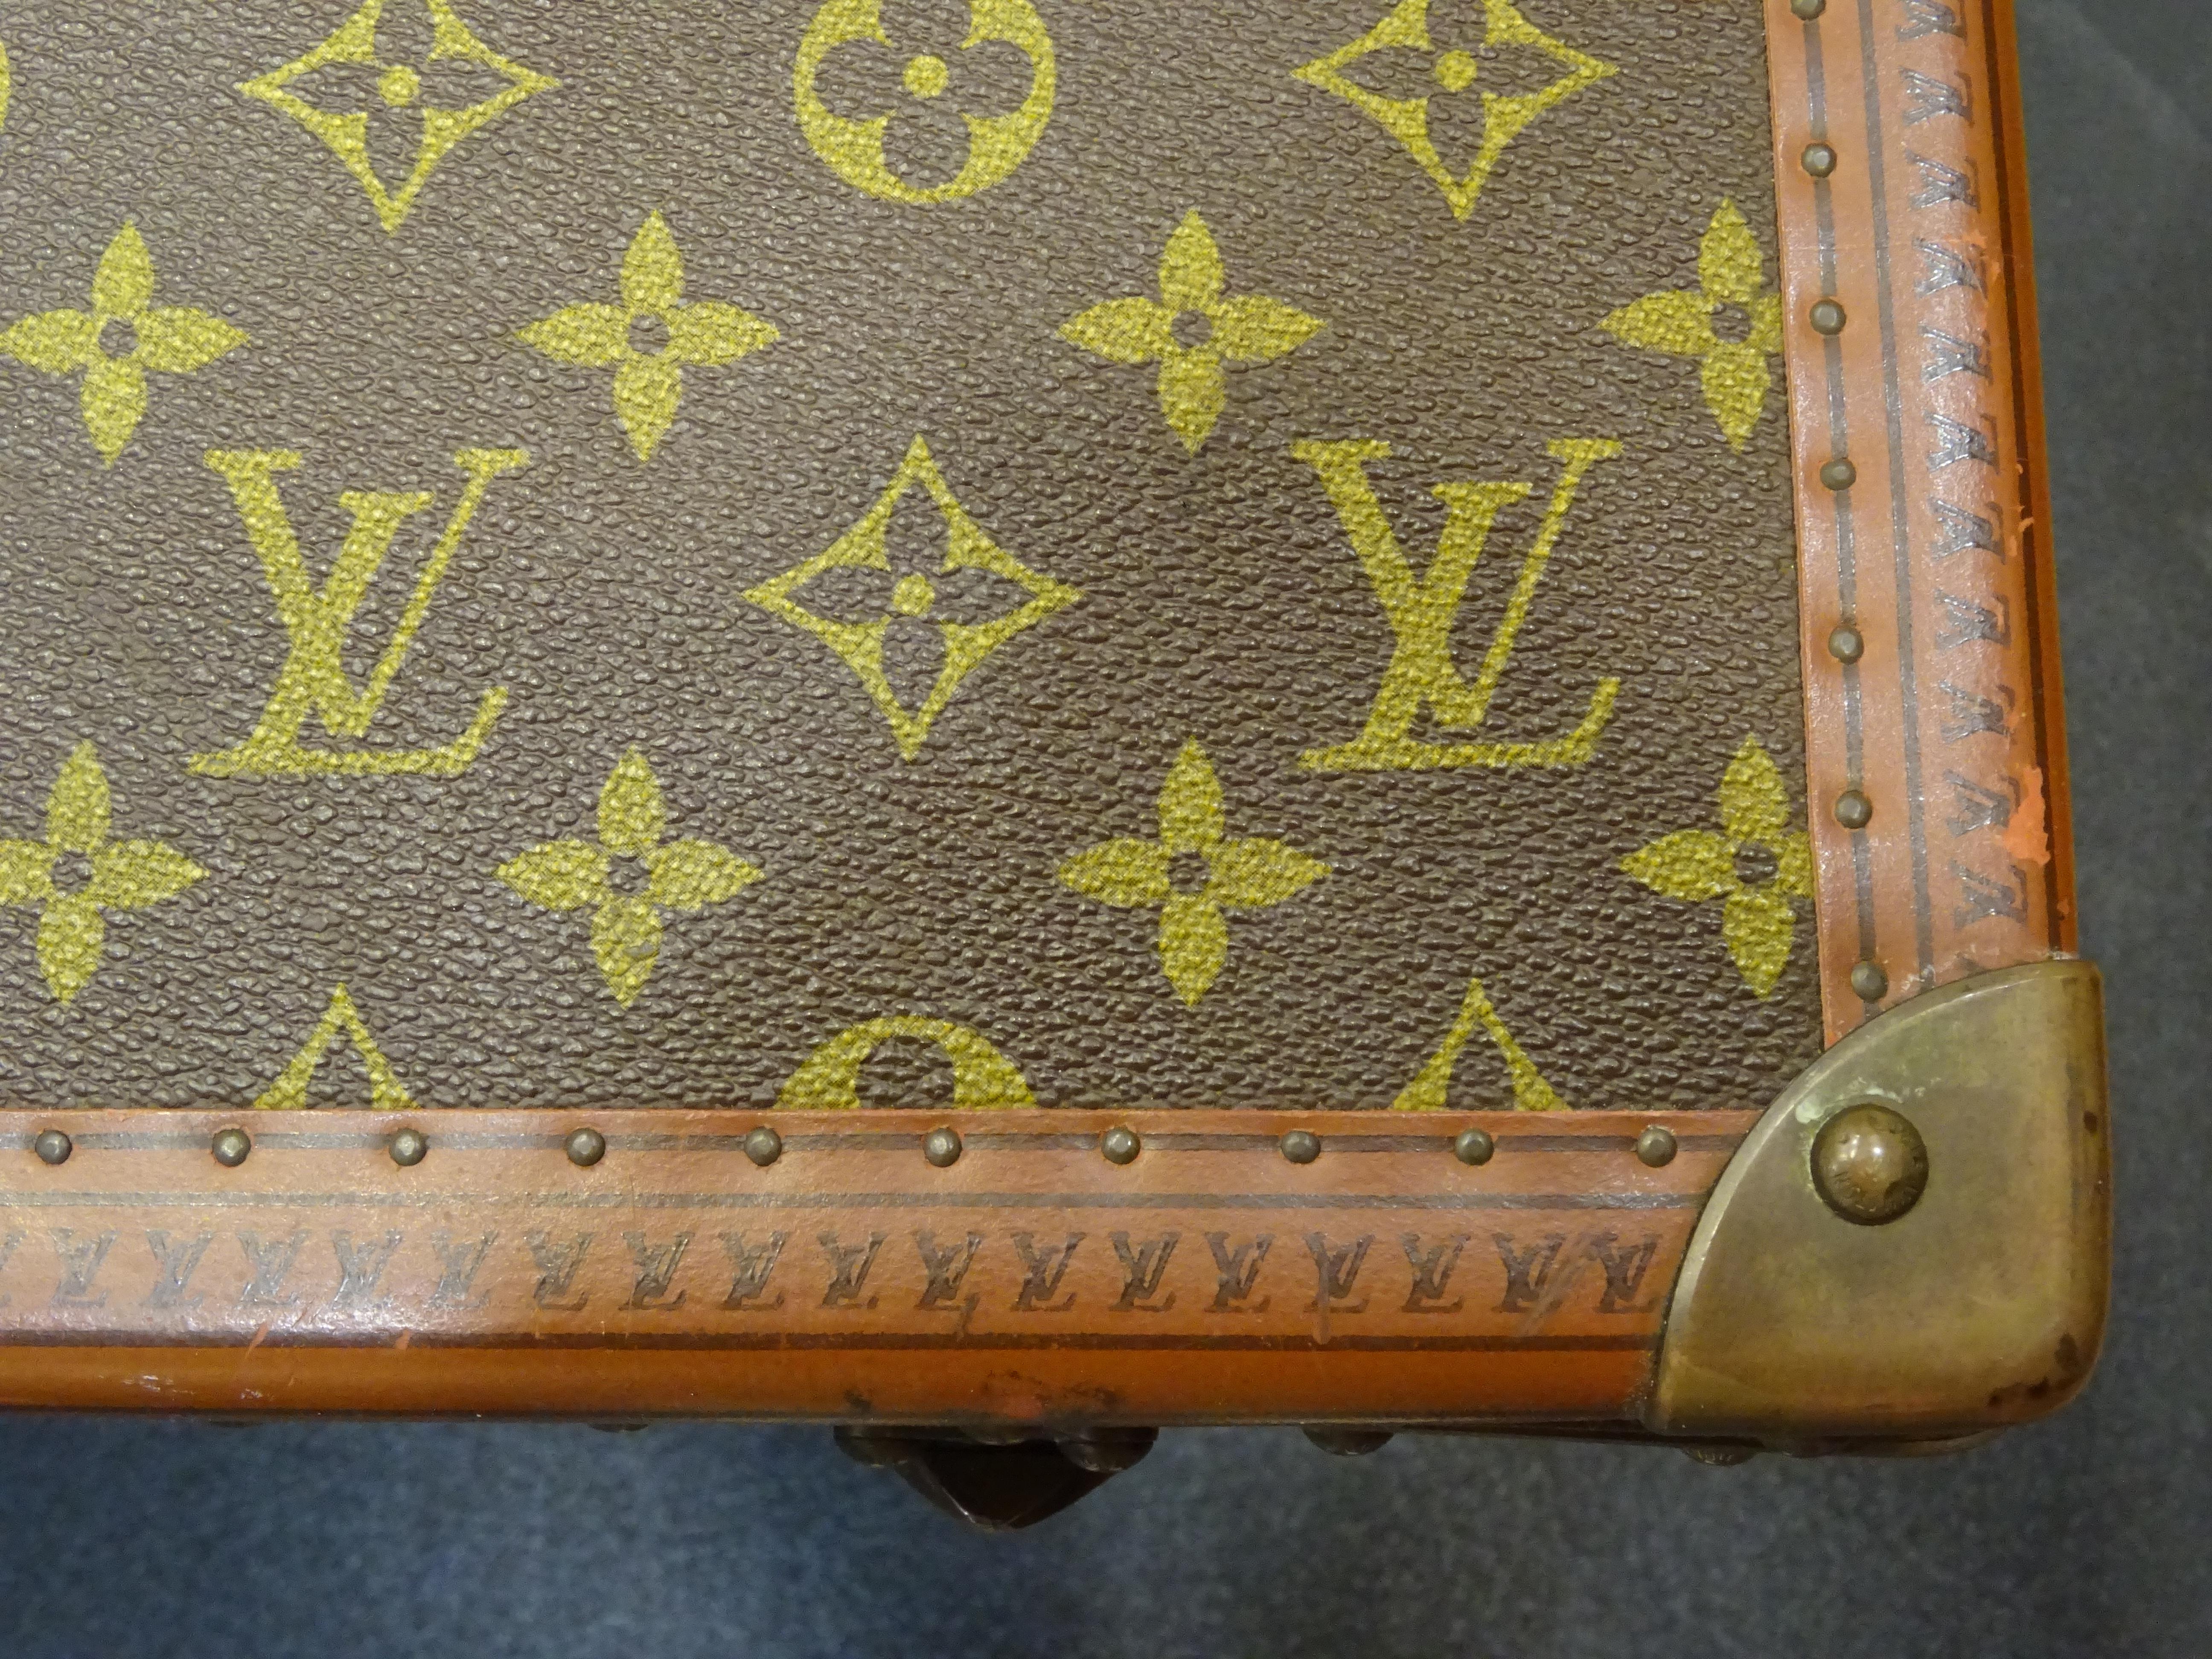 Hand-Crafted Trunk Alzer Louis Vuitton 1980s, Toile Enduite Monogram